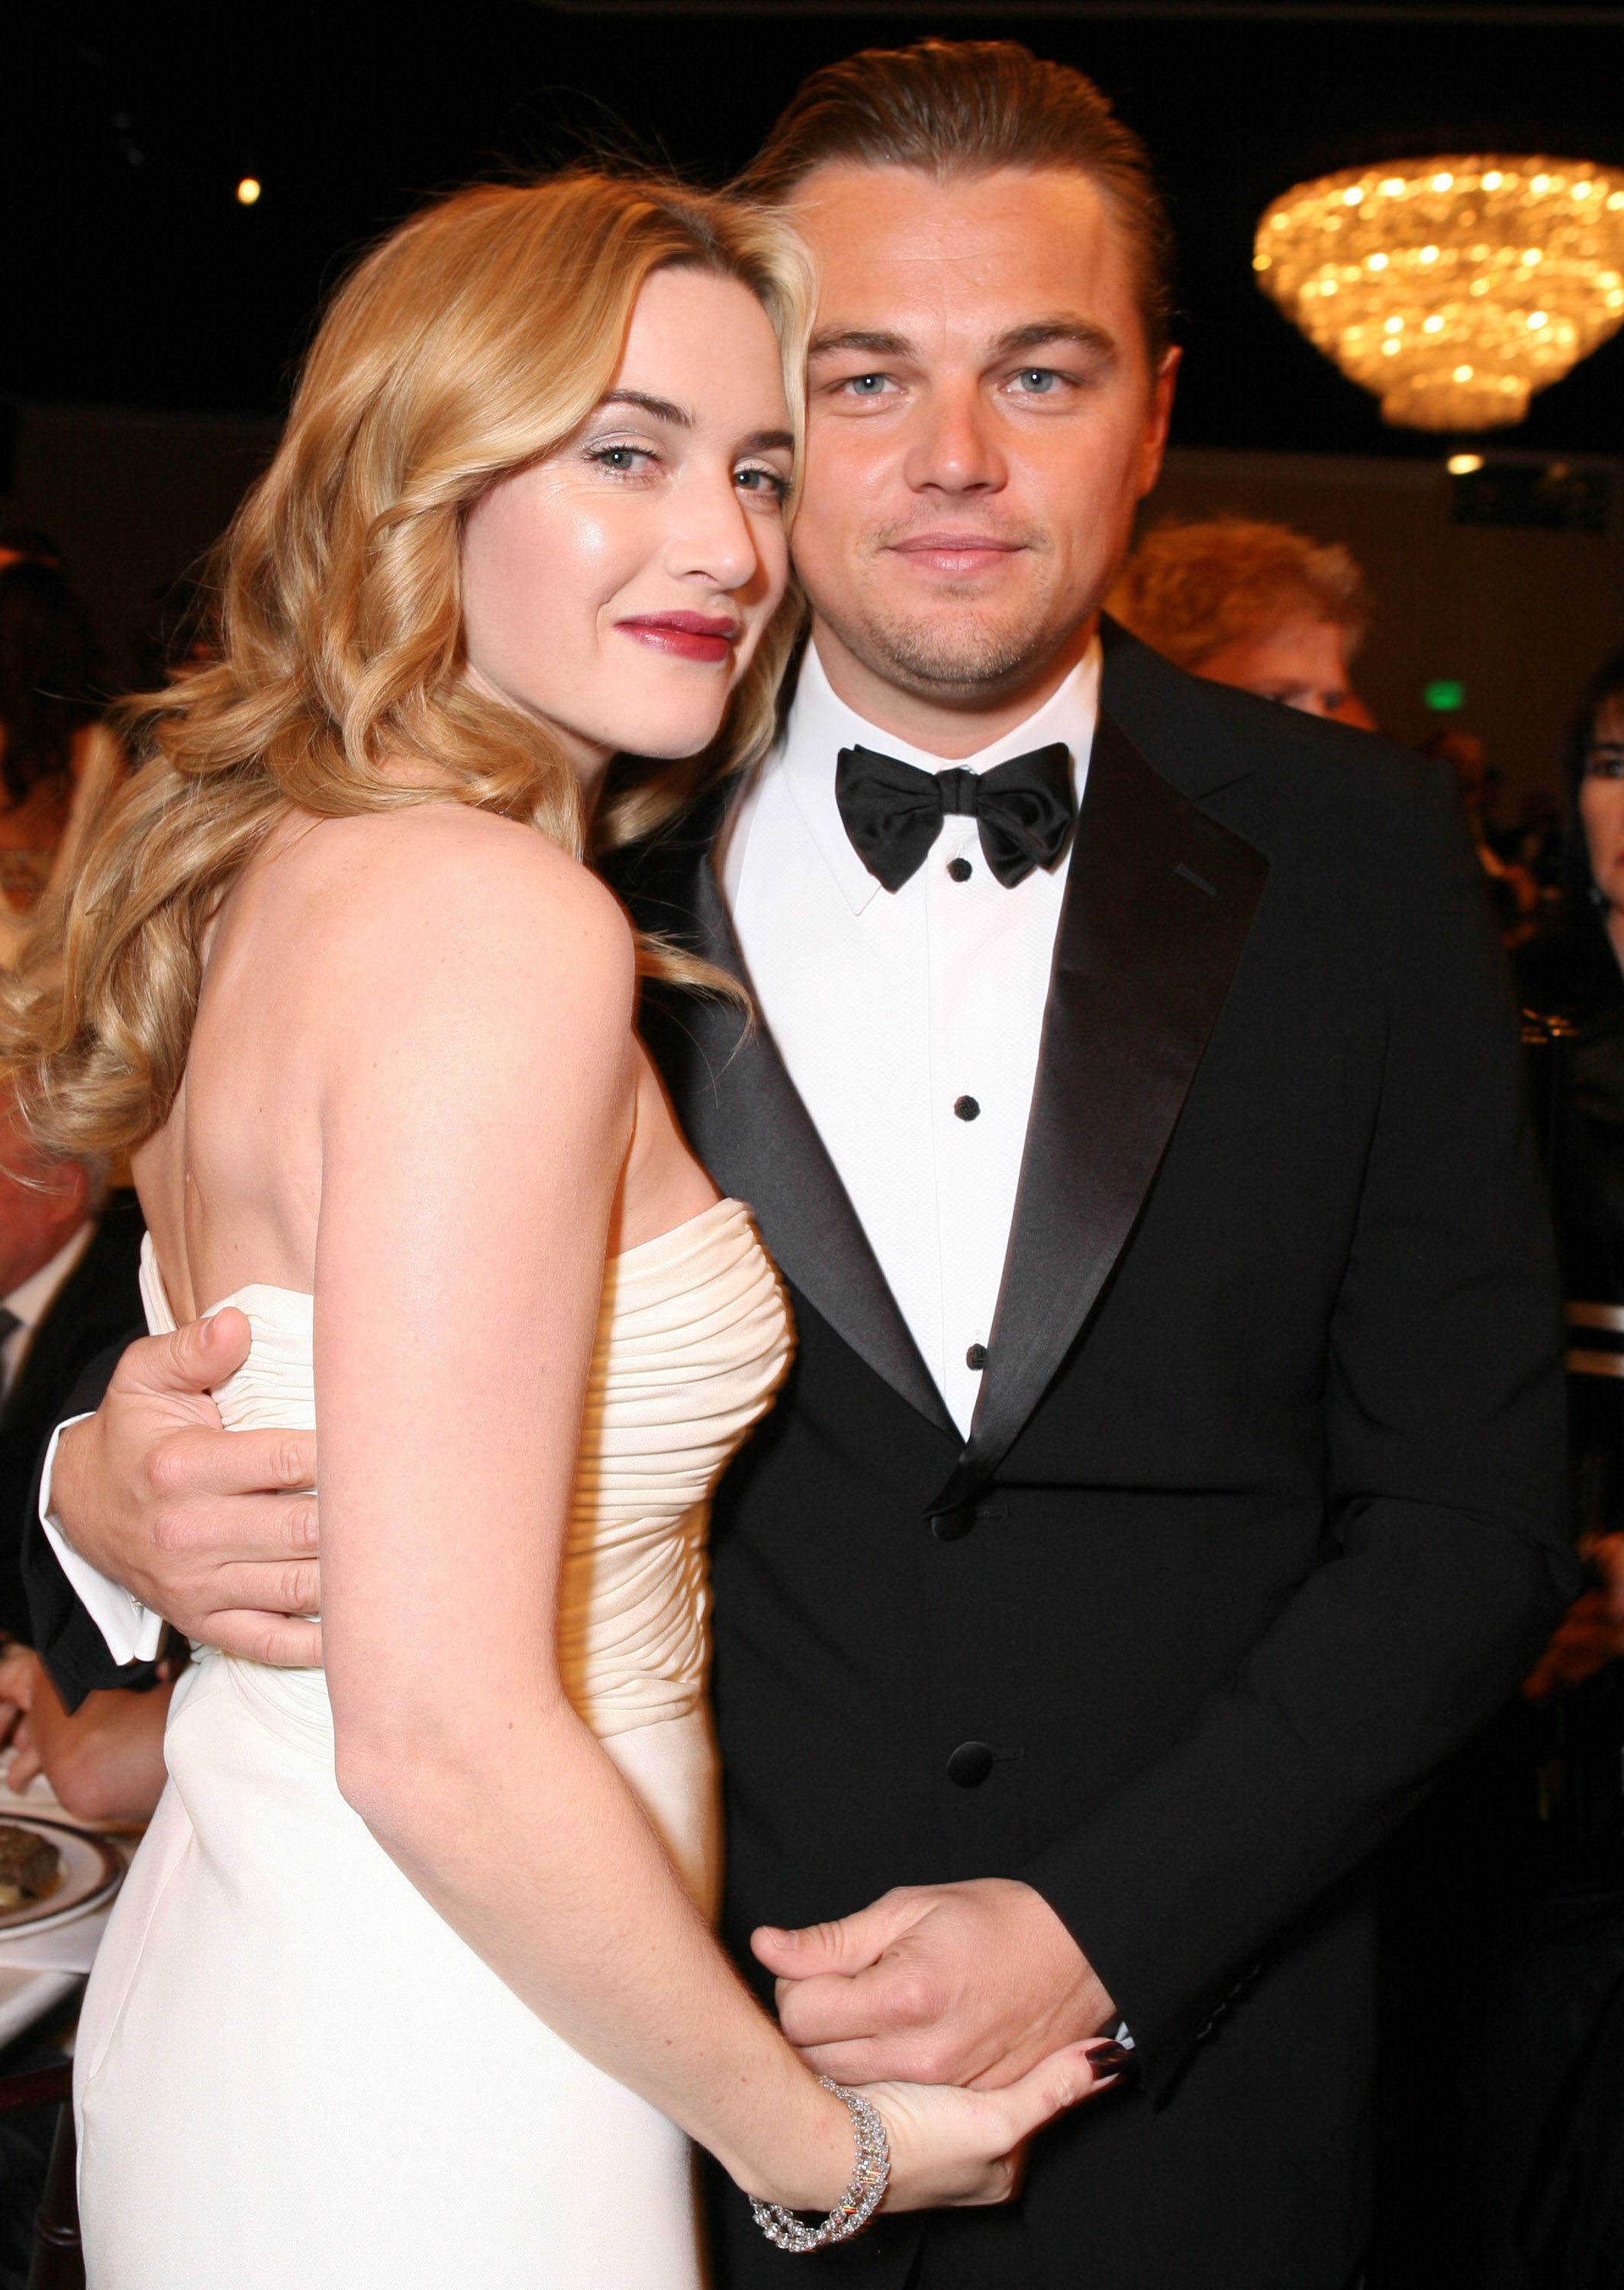 Kate And Leonardo Friendship: The British Actor Opens Up About 'Titanic' Co-Star